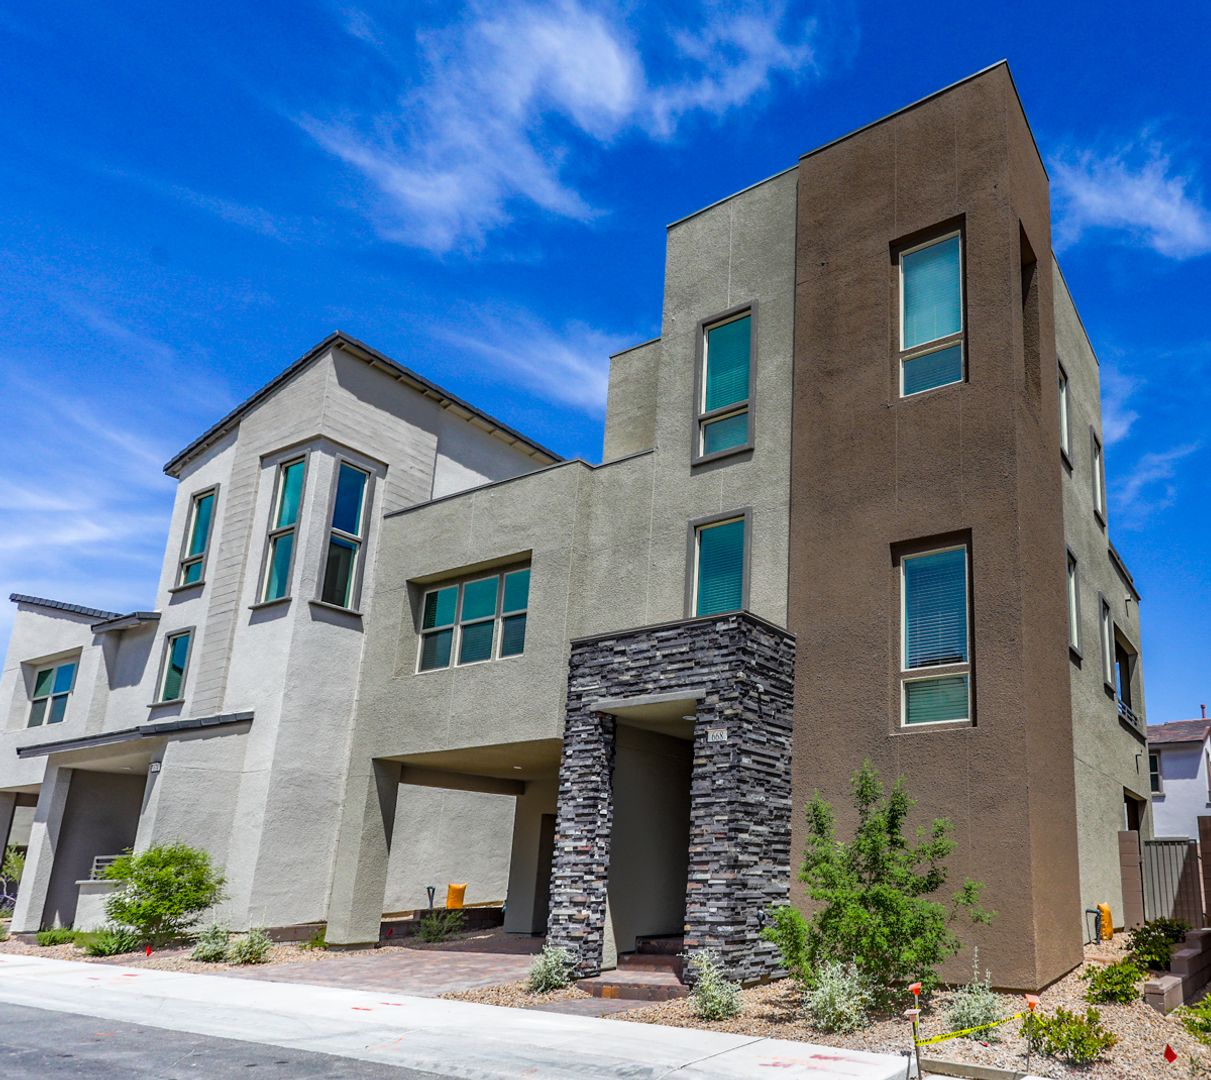 Brand New Never Lived In 2 Bed, 3.5 Bath, Summerlin Beauty